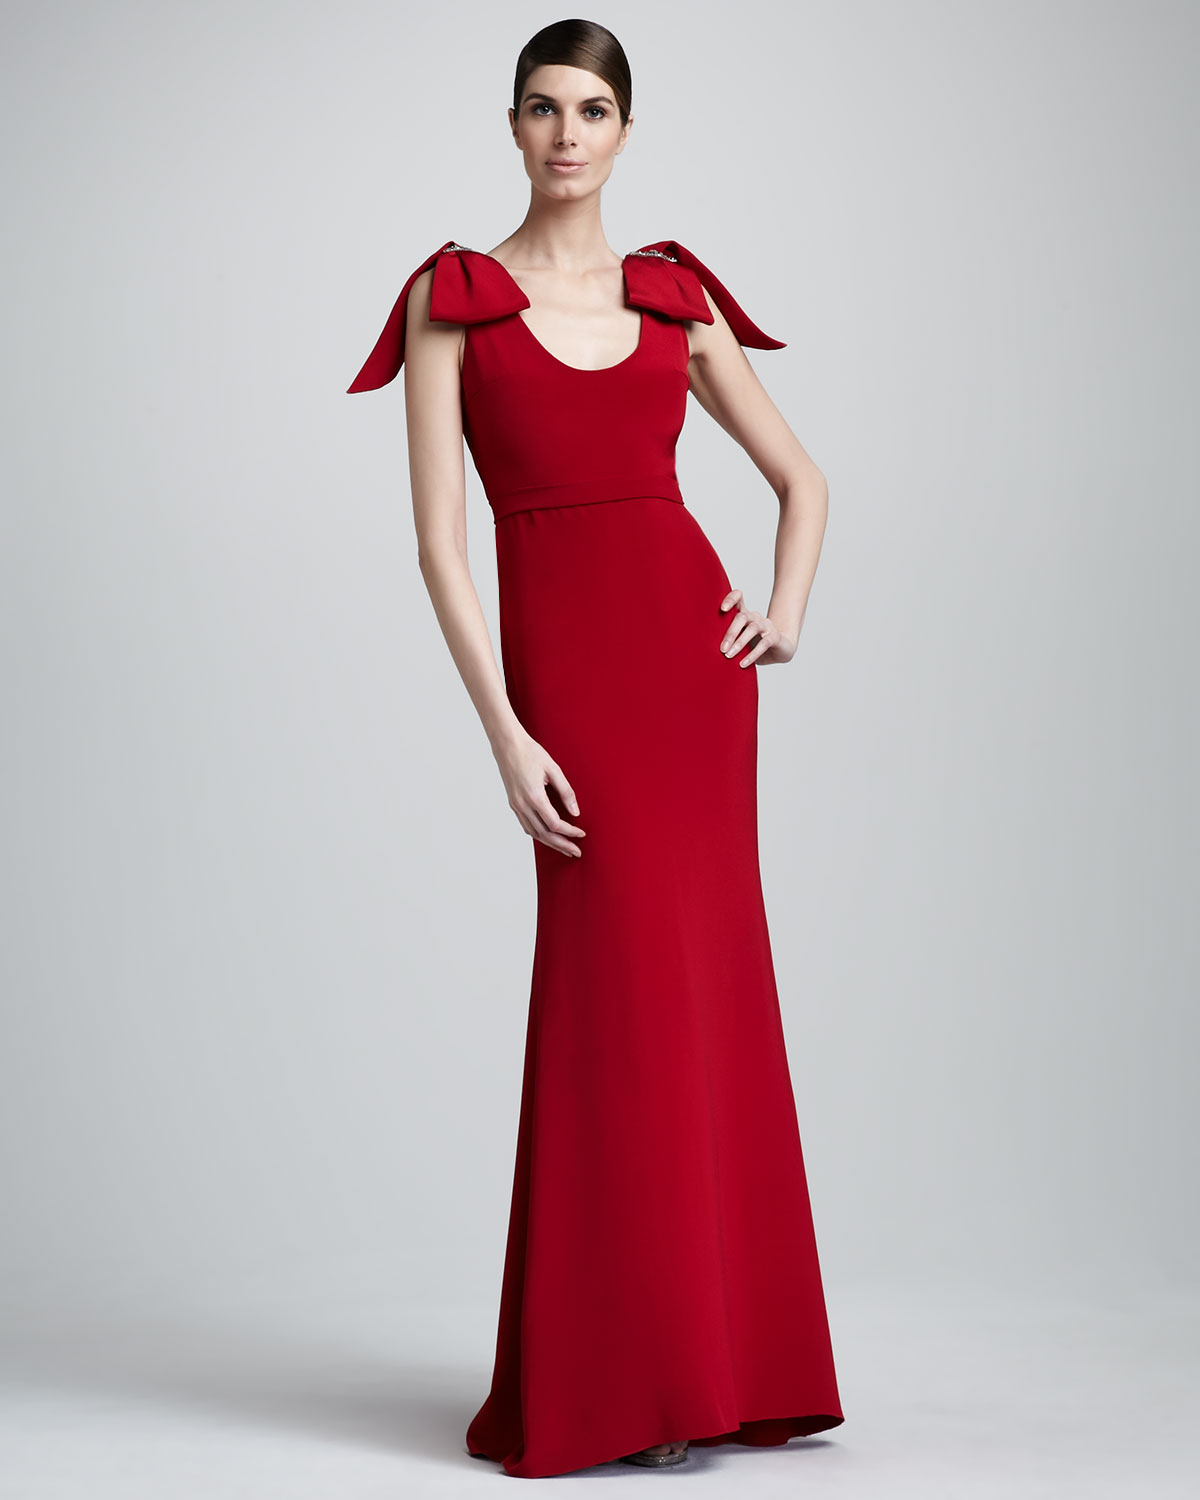 Lyst - Notte By Marchesa Bow-shoulder Gown in Red